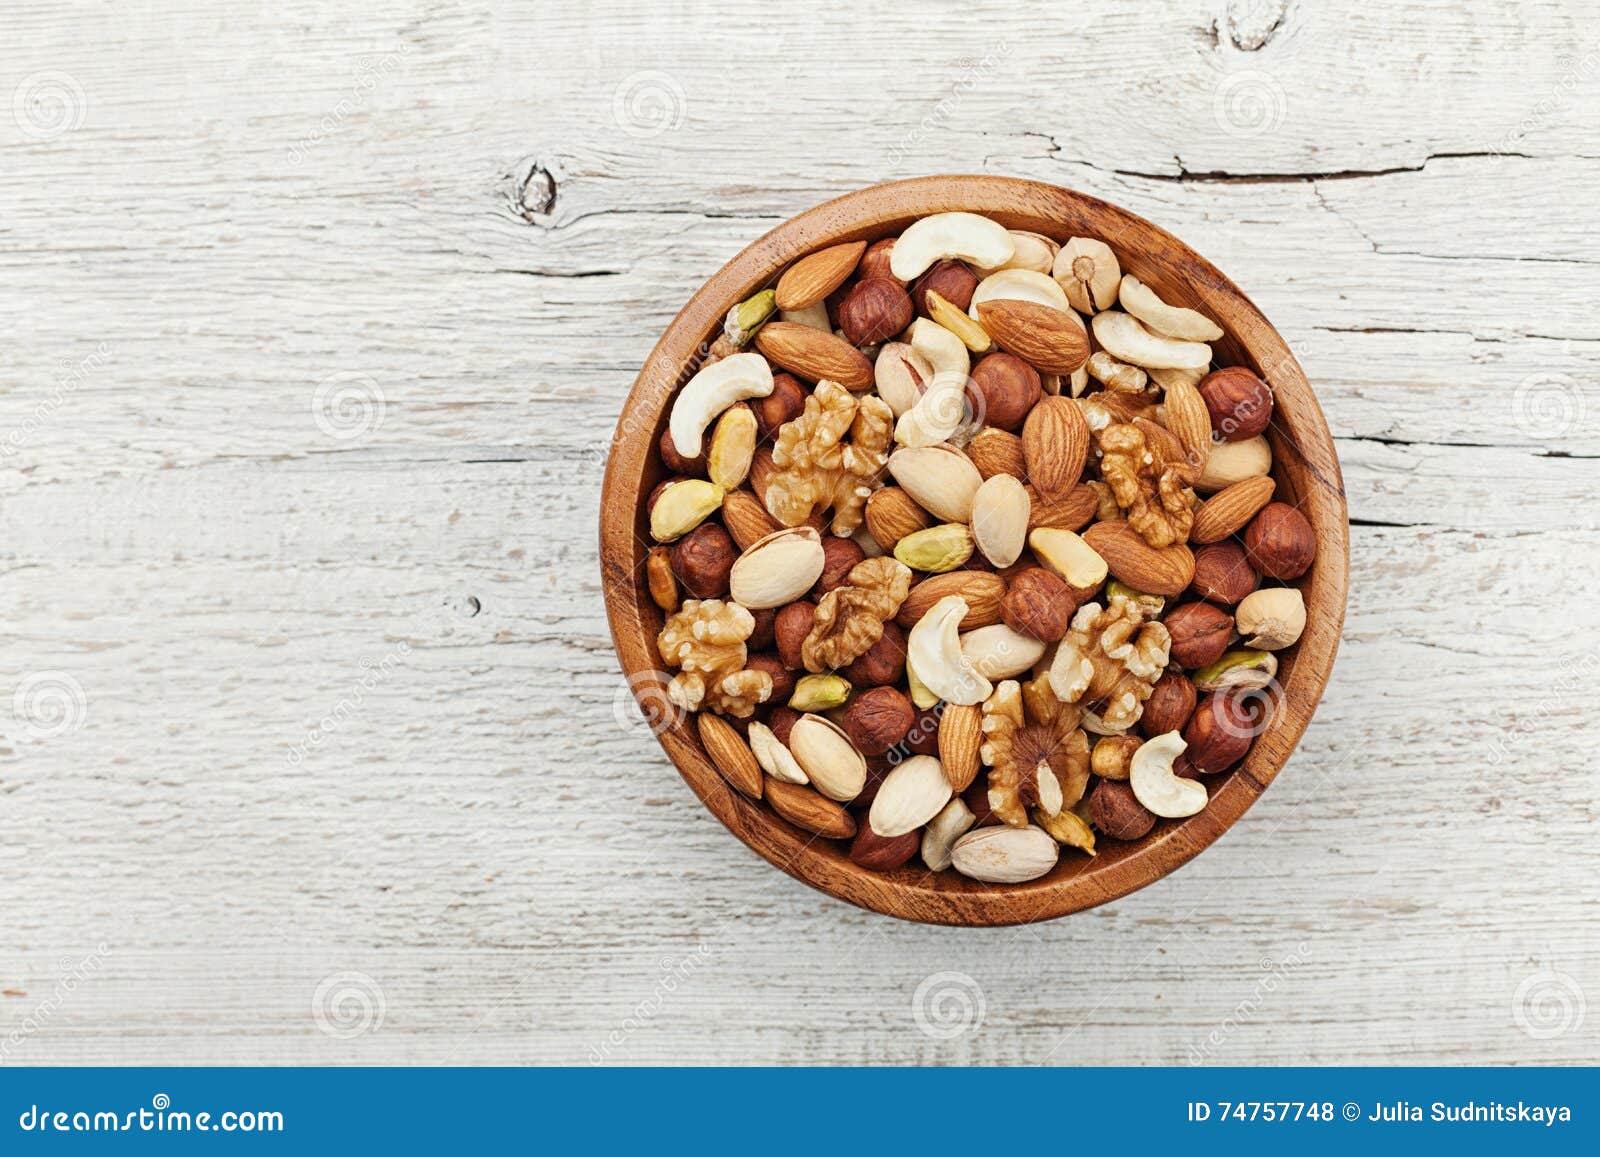 wooden bowl with mixed nuts on white table from above. healthy food and snack. walnut, pistachios, almonds, hazelnuts and